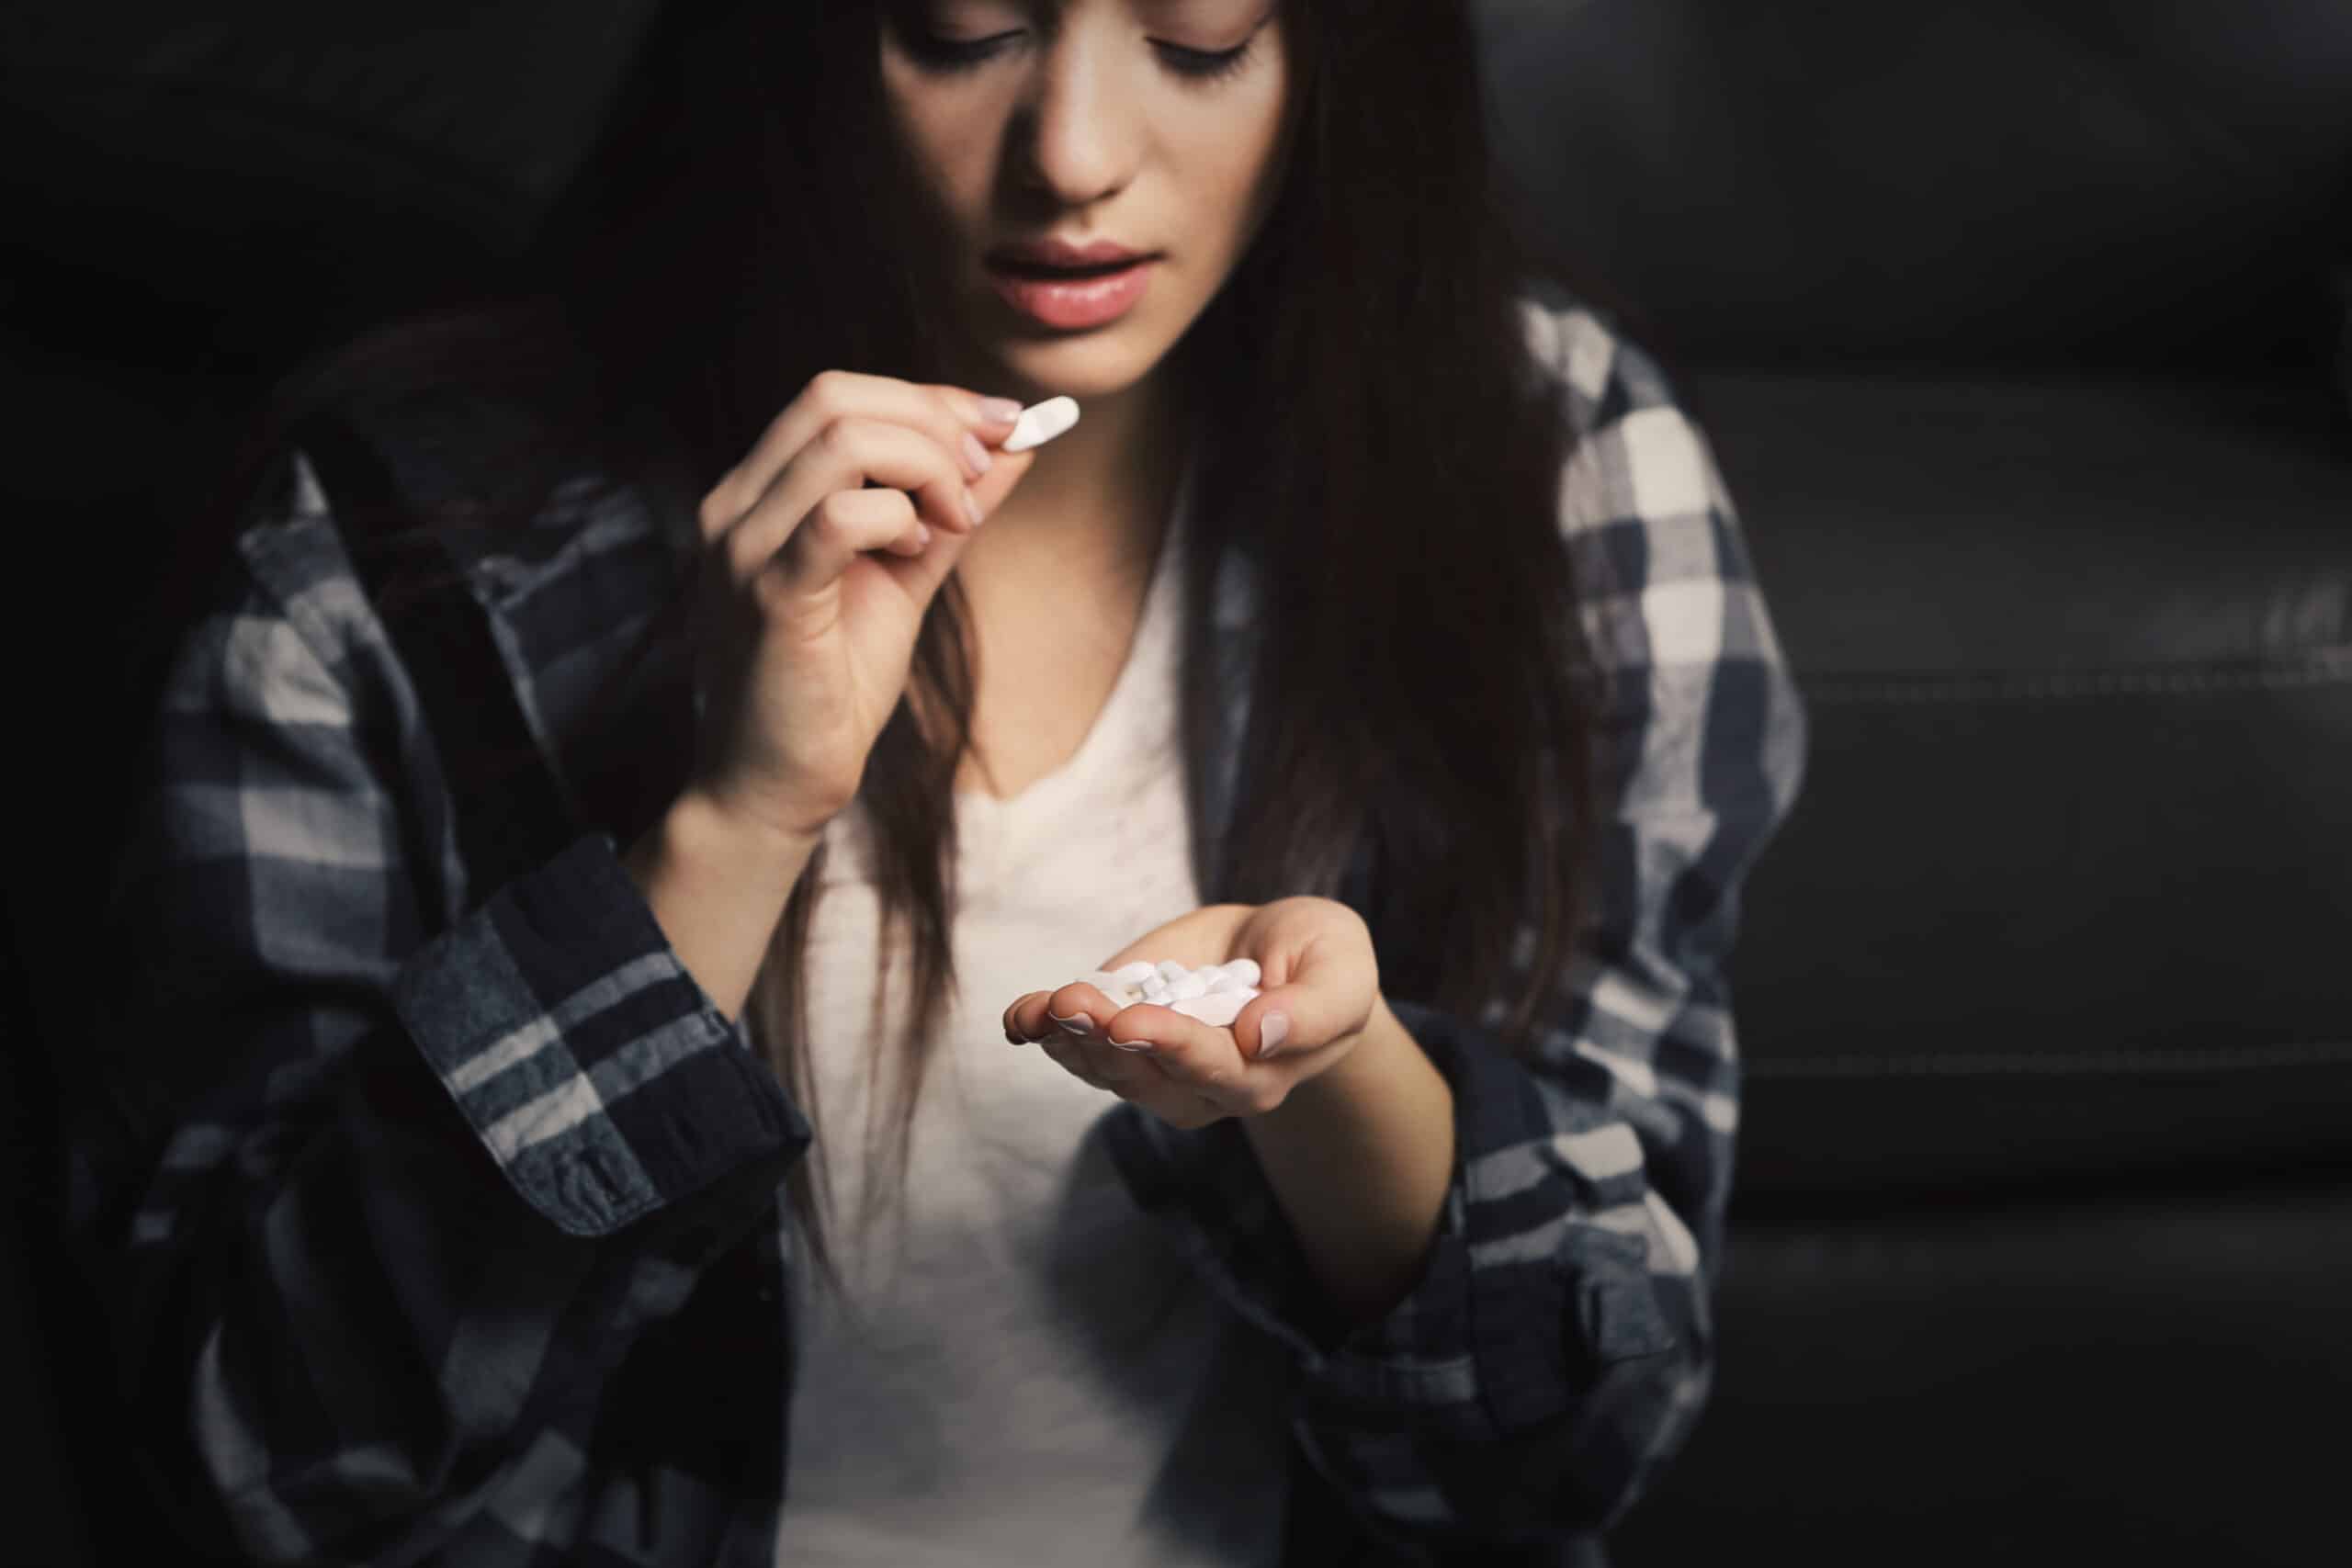 Young female in plaid shirt raising her hand to take a white klonopin pill while in the other hand holding the remaining white pills represents her klonopin addiction.